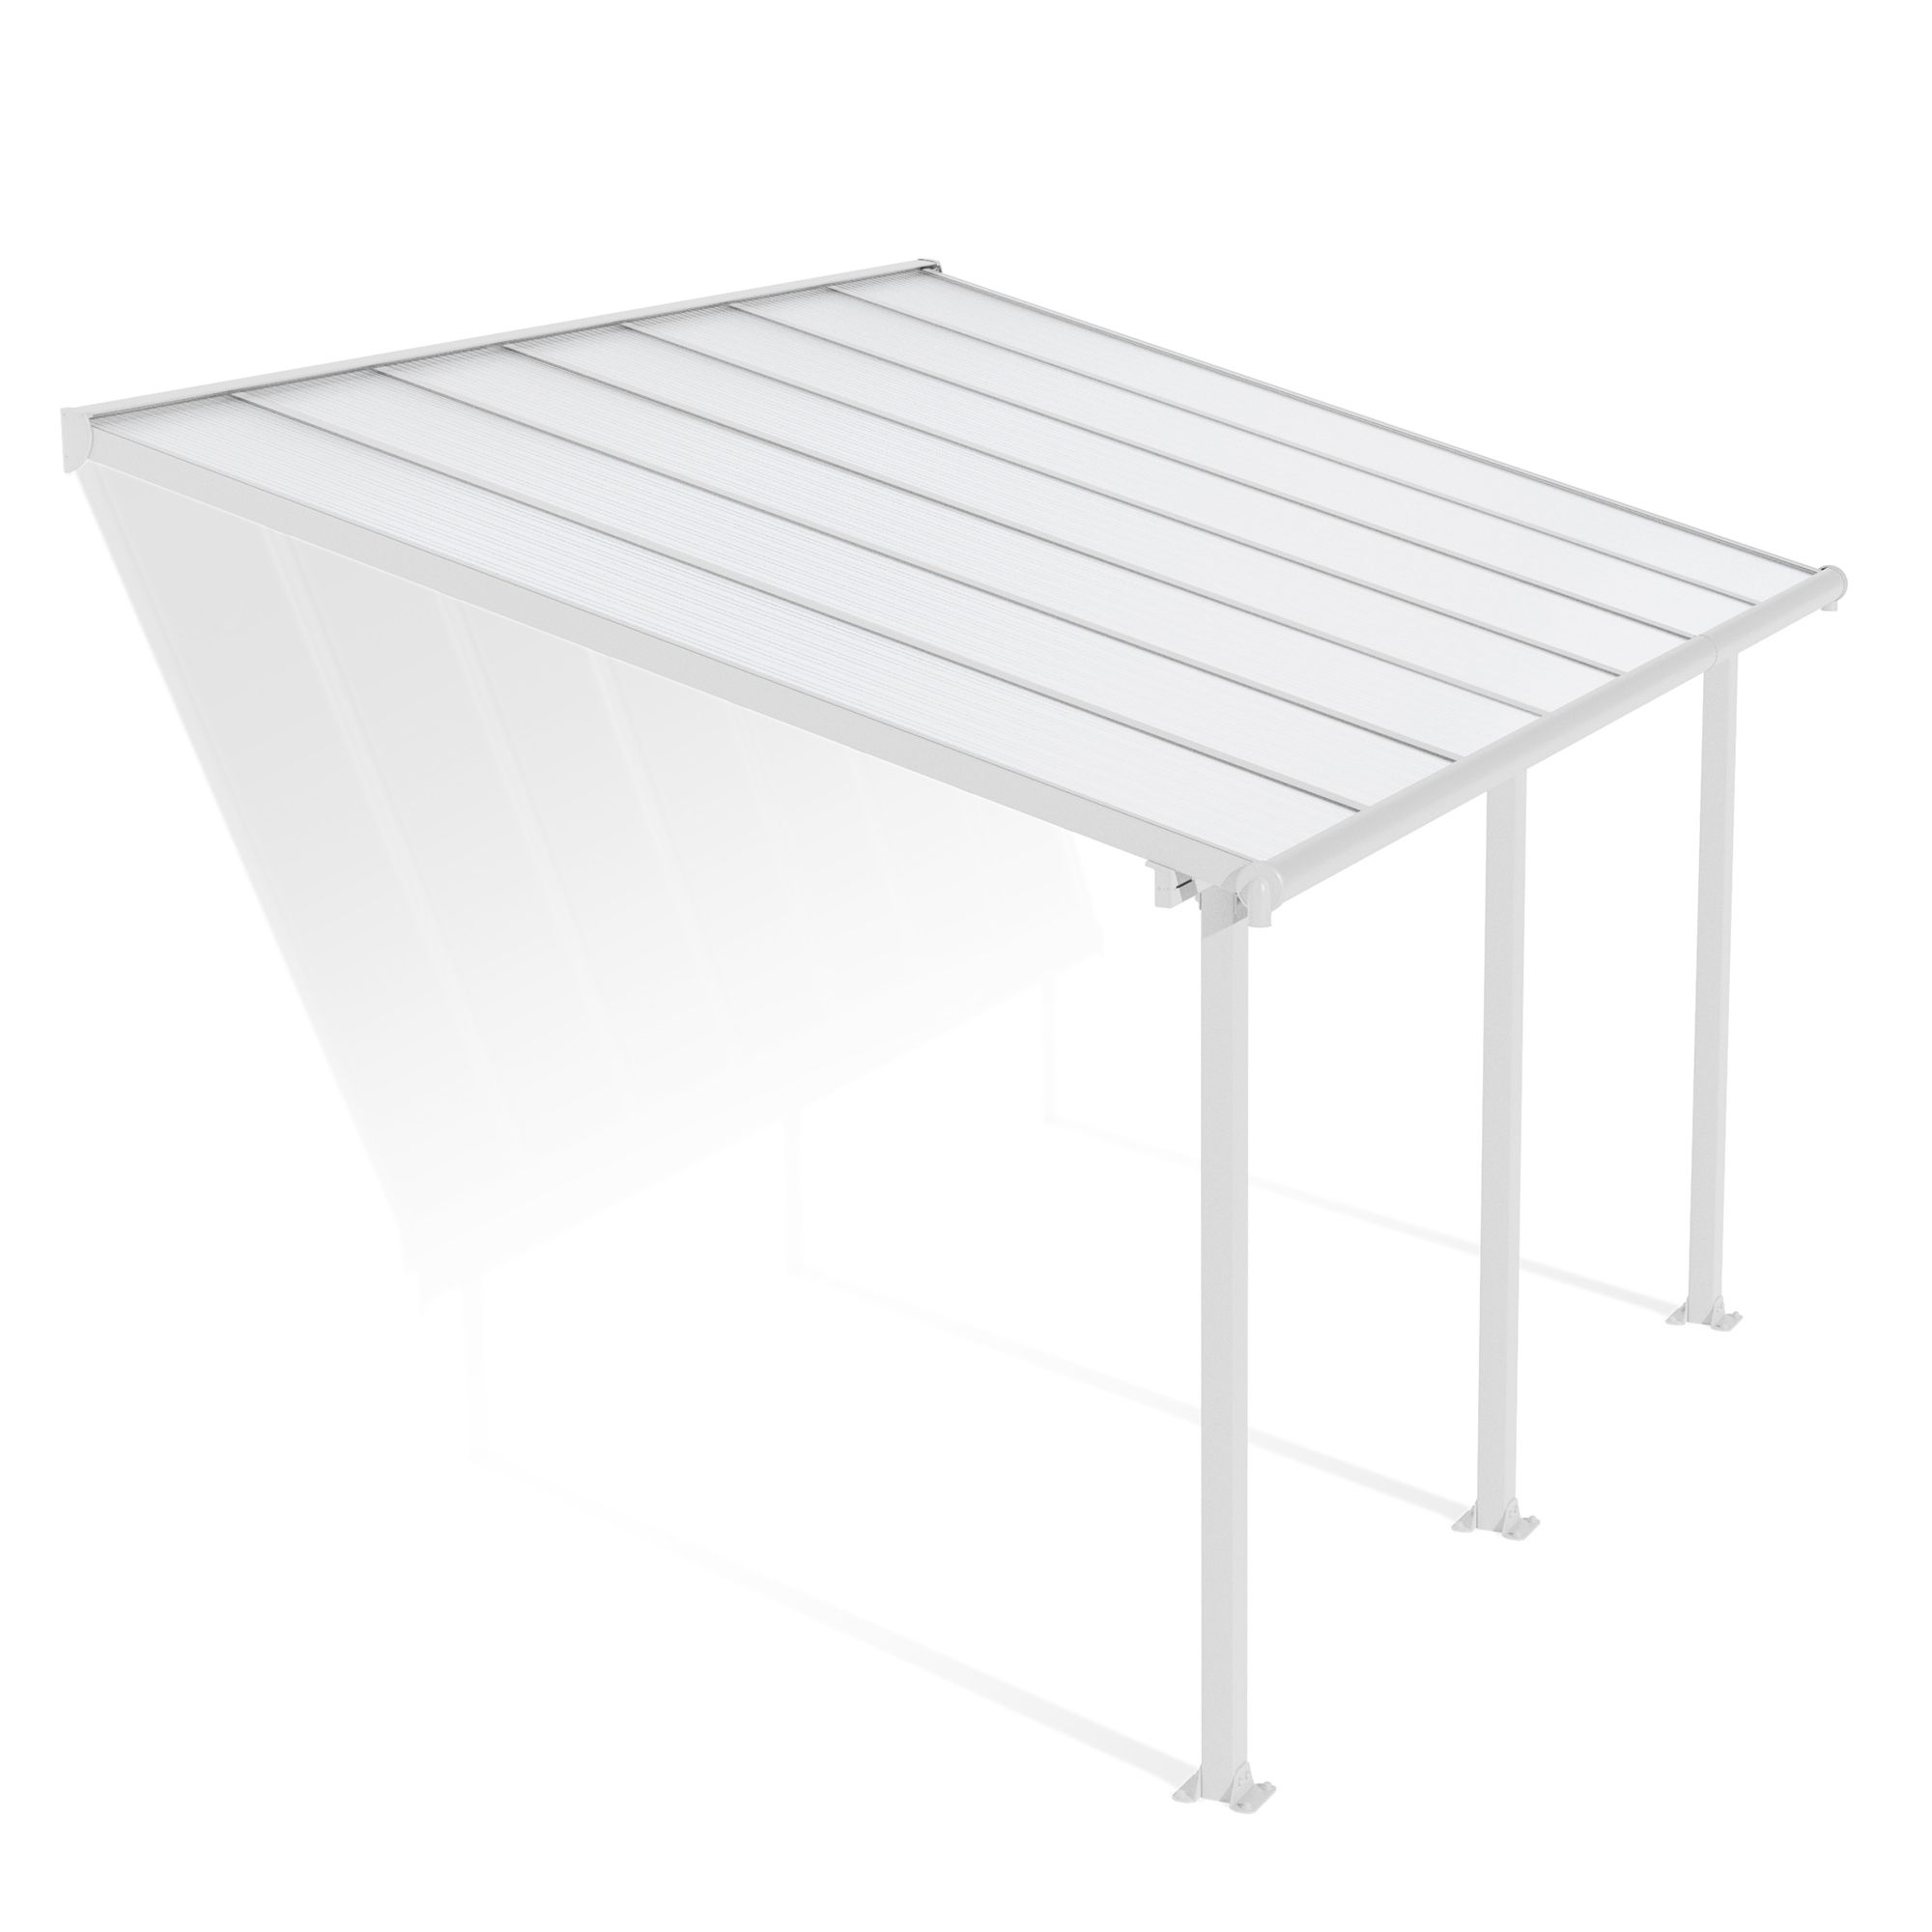 Olympia White Patio cover (H)3050mm (W)2950mm (D)4250mm